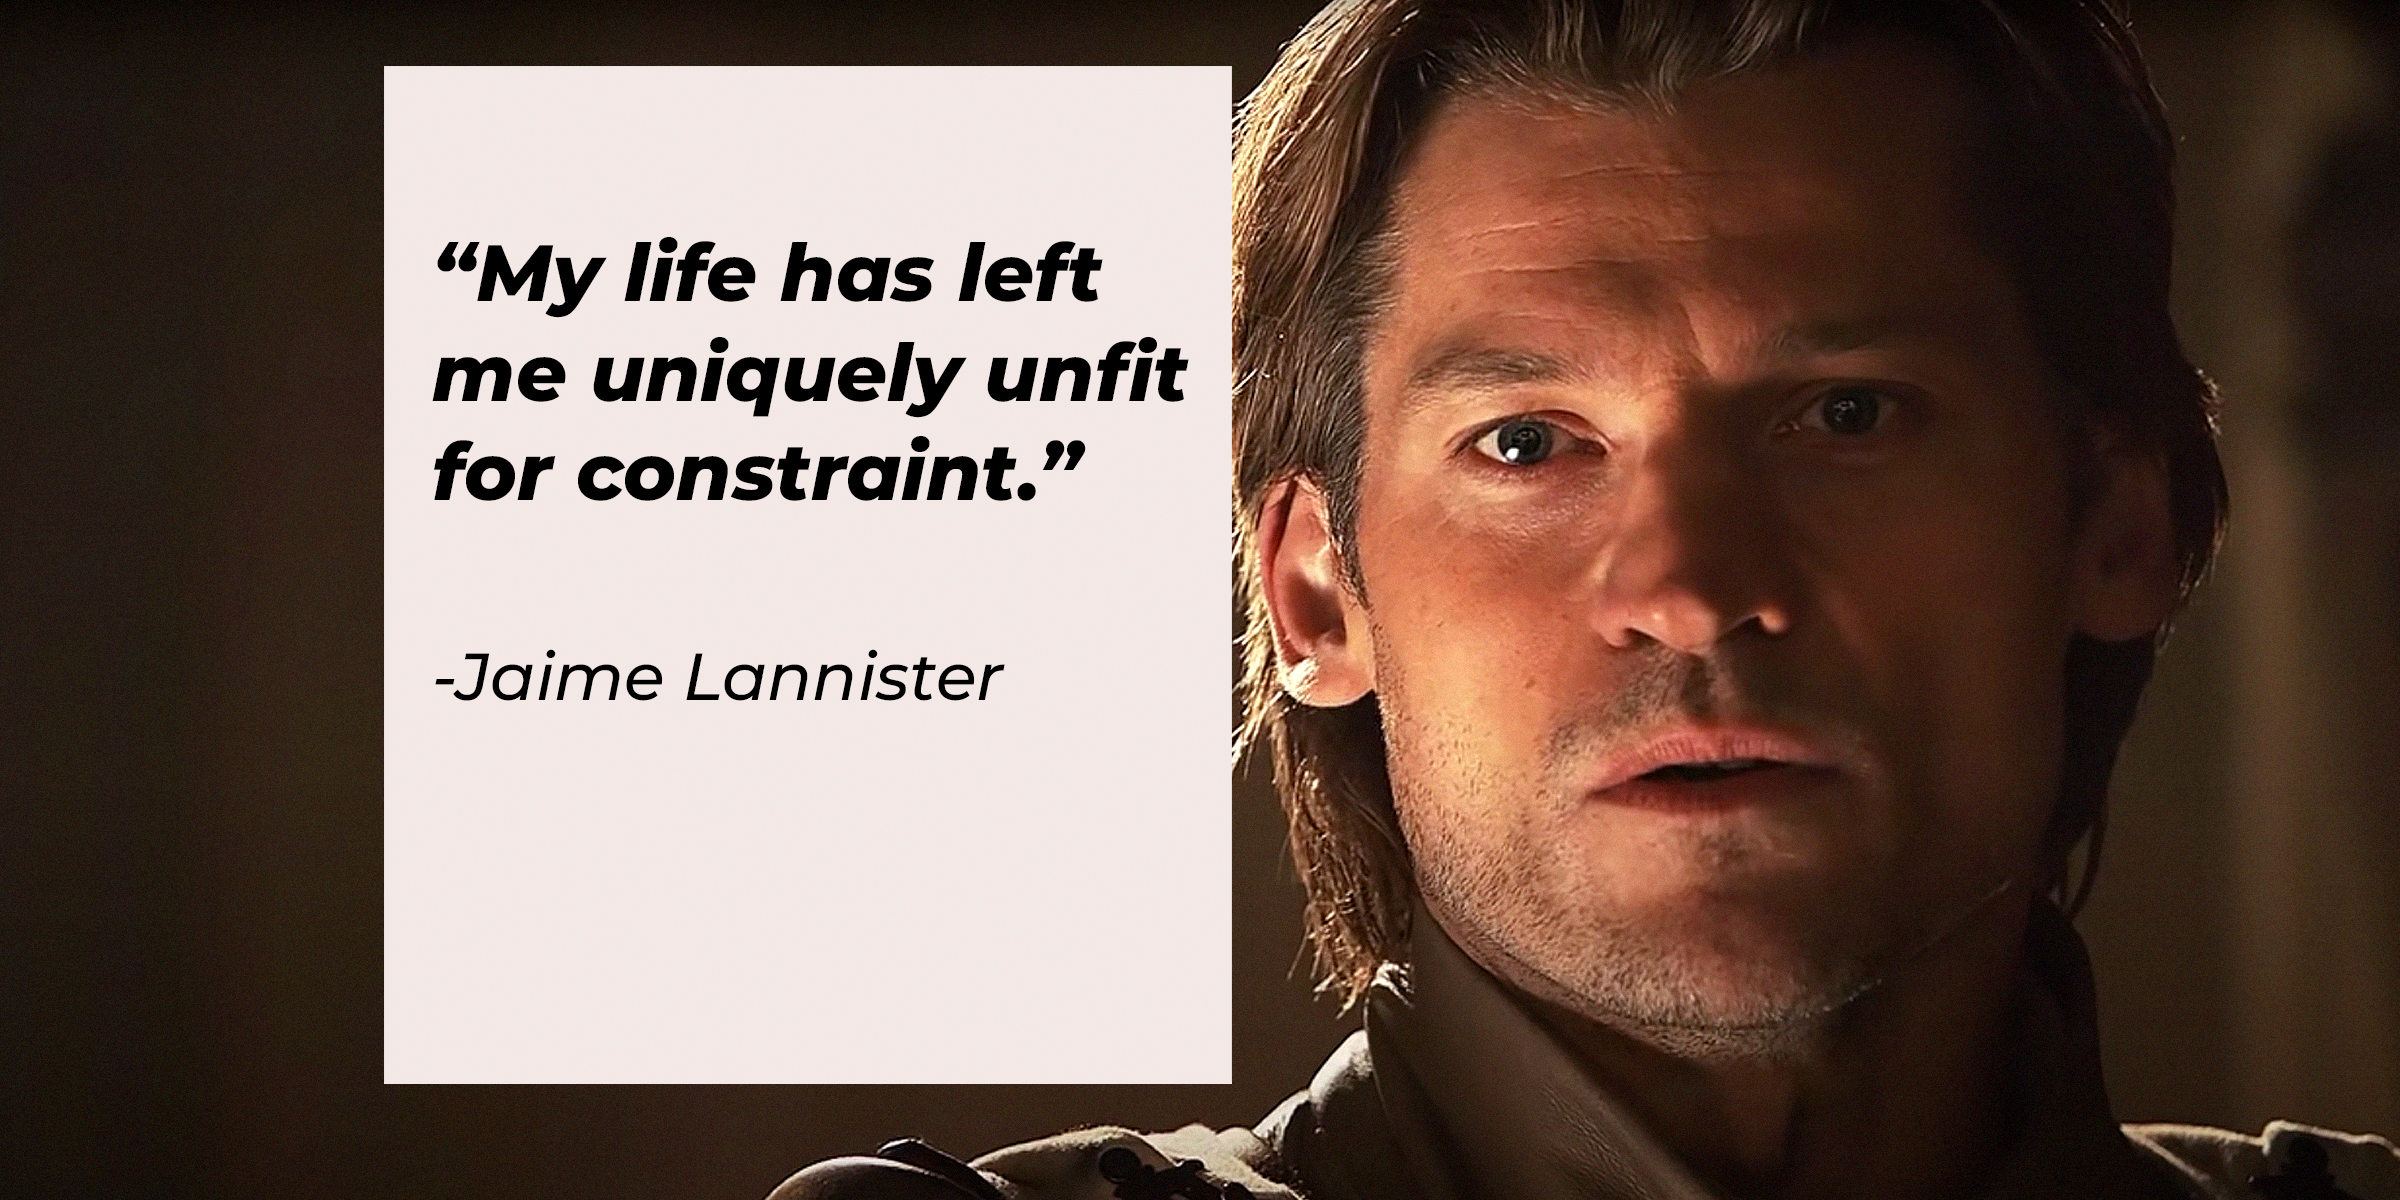 An image of Jaime Lannister, played by Nikolaj Coster-Waldau, with his quote: "My life has left me uniquely unfit for constraint." | Source: facebook.com/Game of Thrones